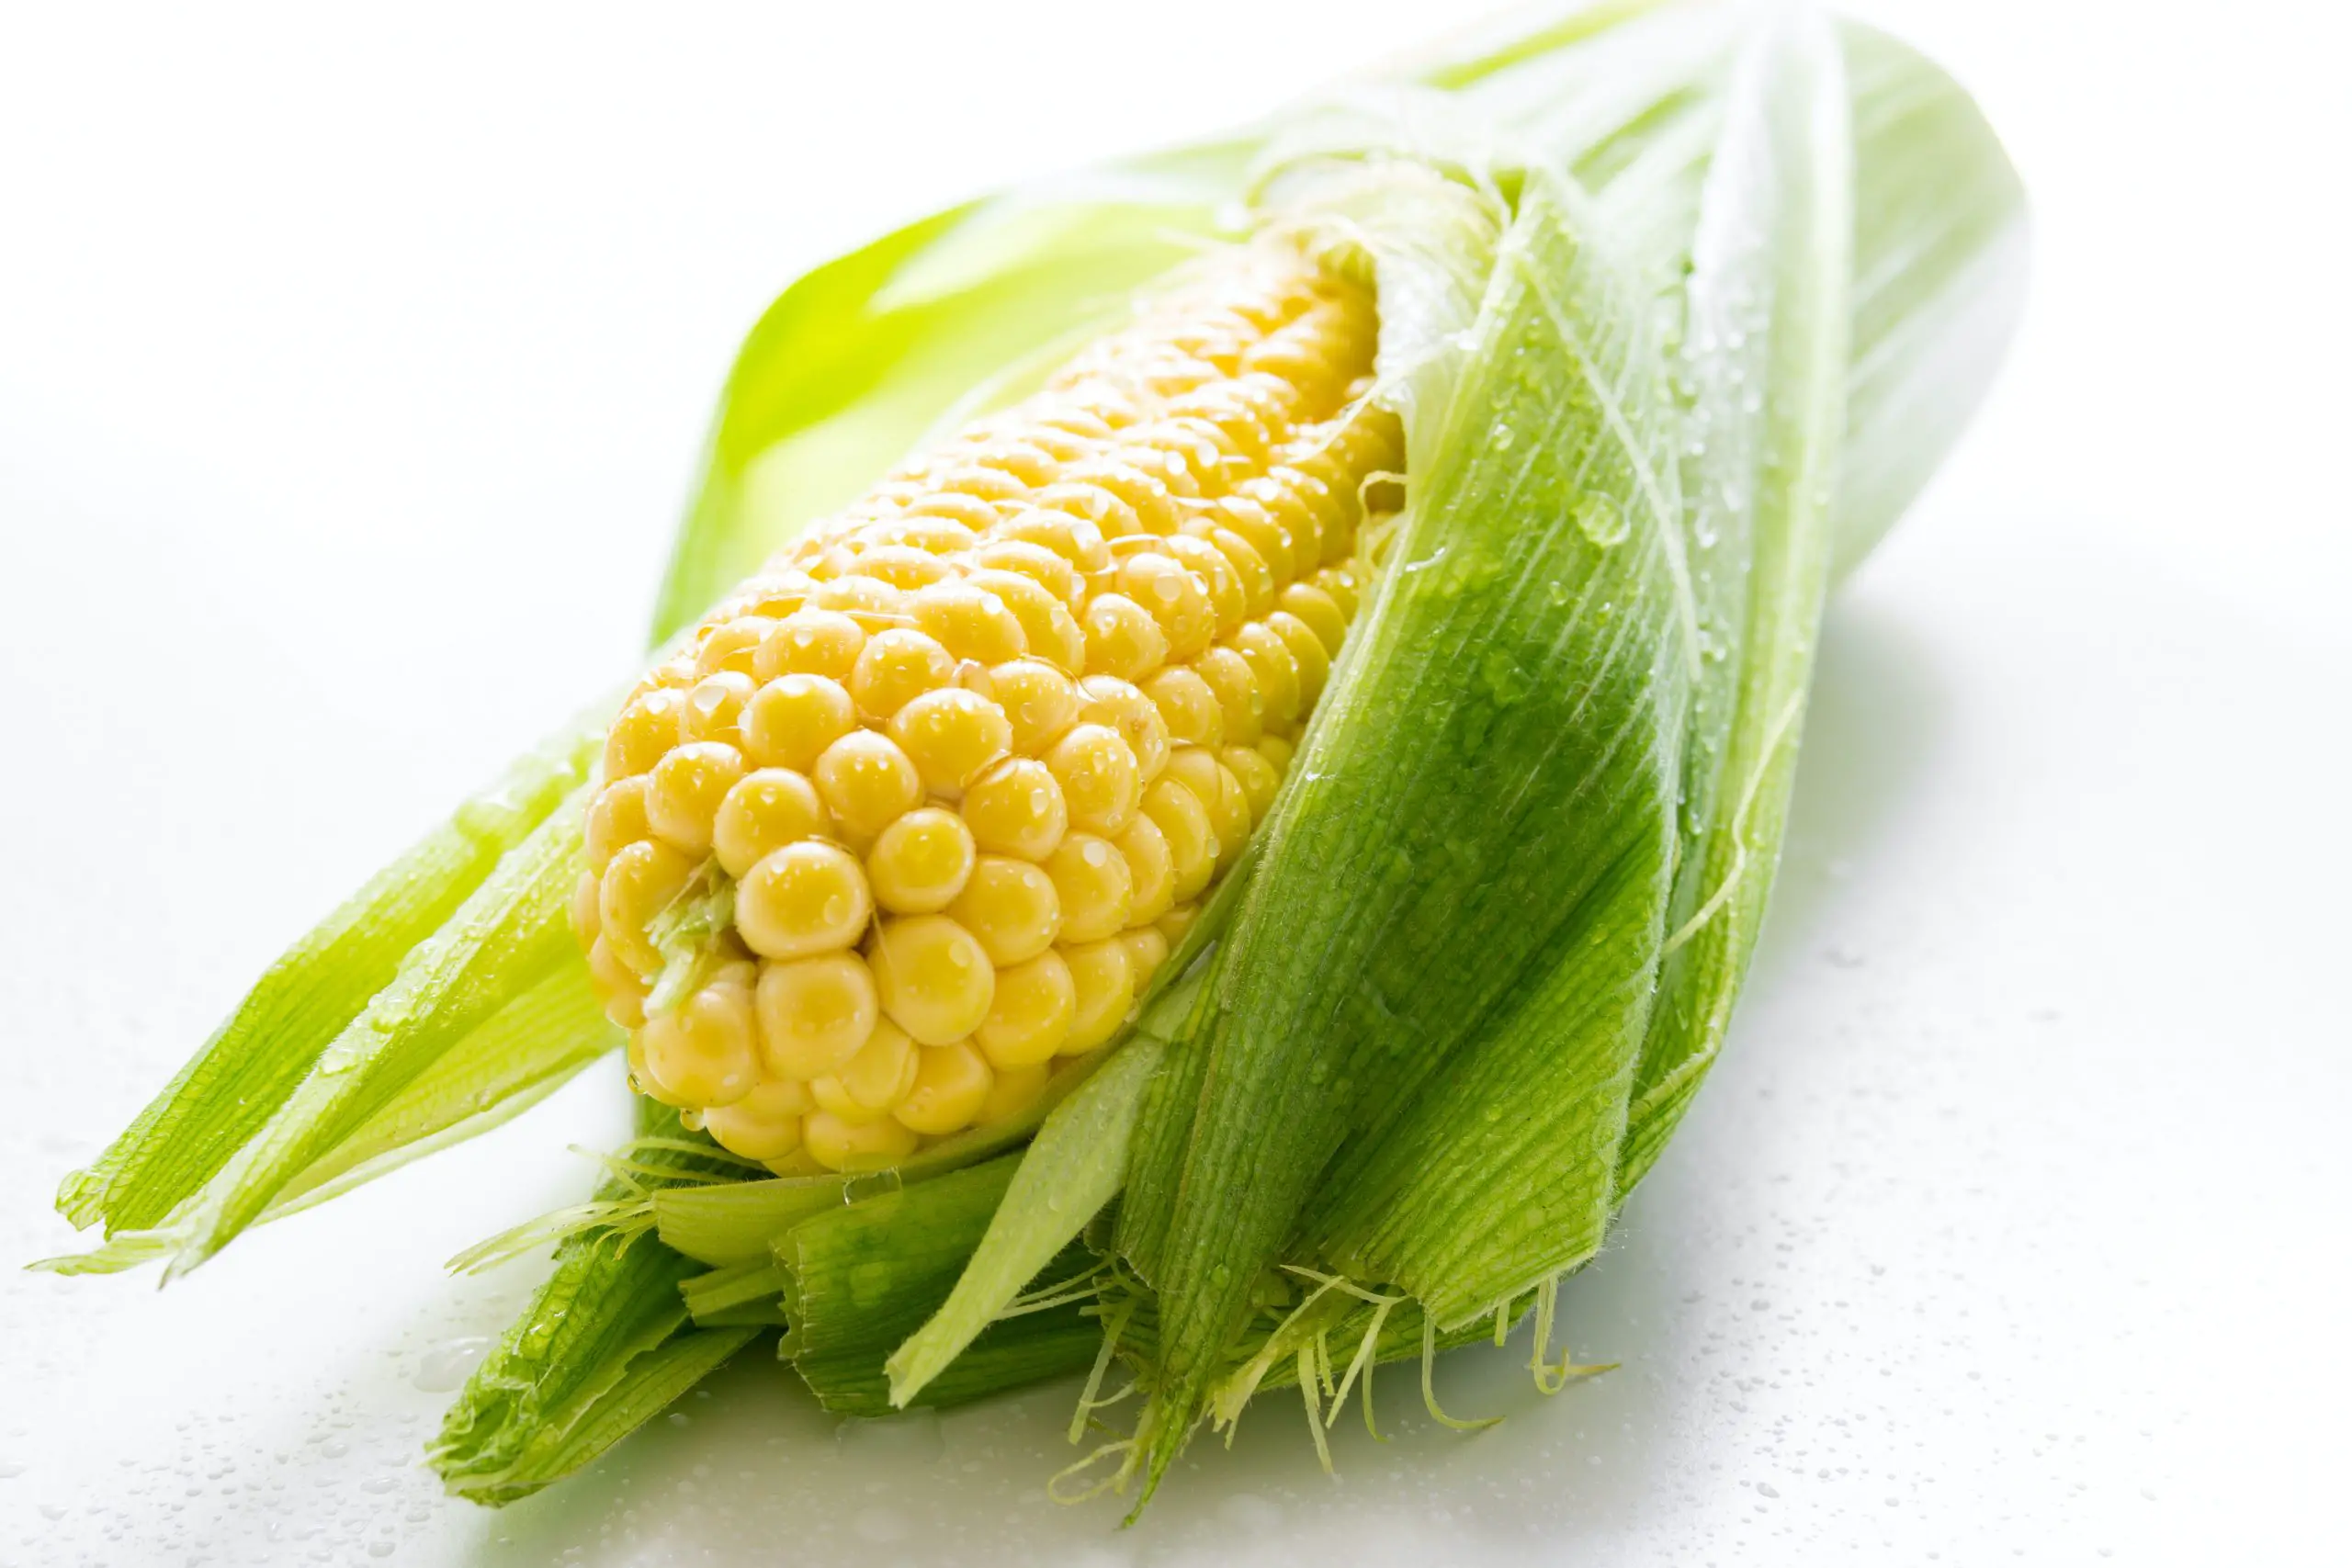 How to Freeze Corn on the Cob Without Blanching?